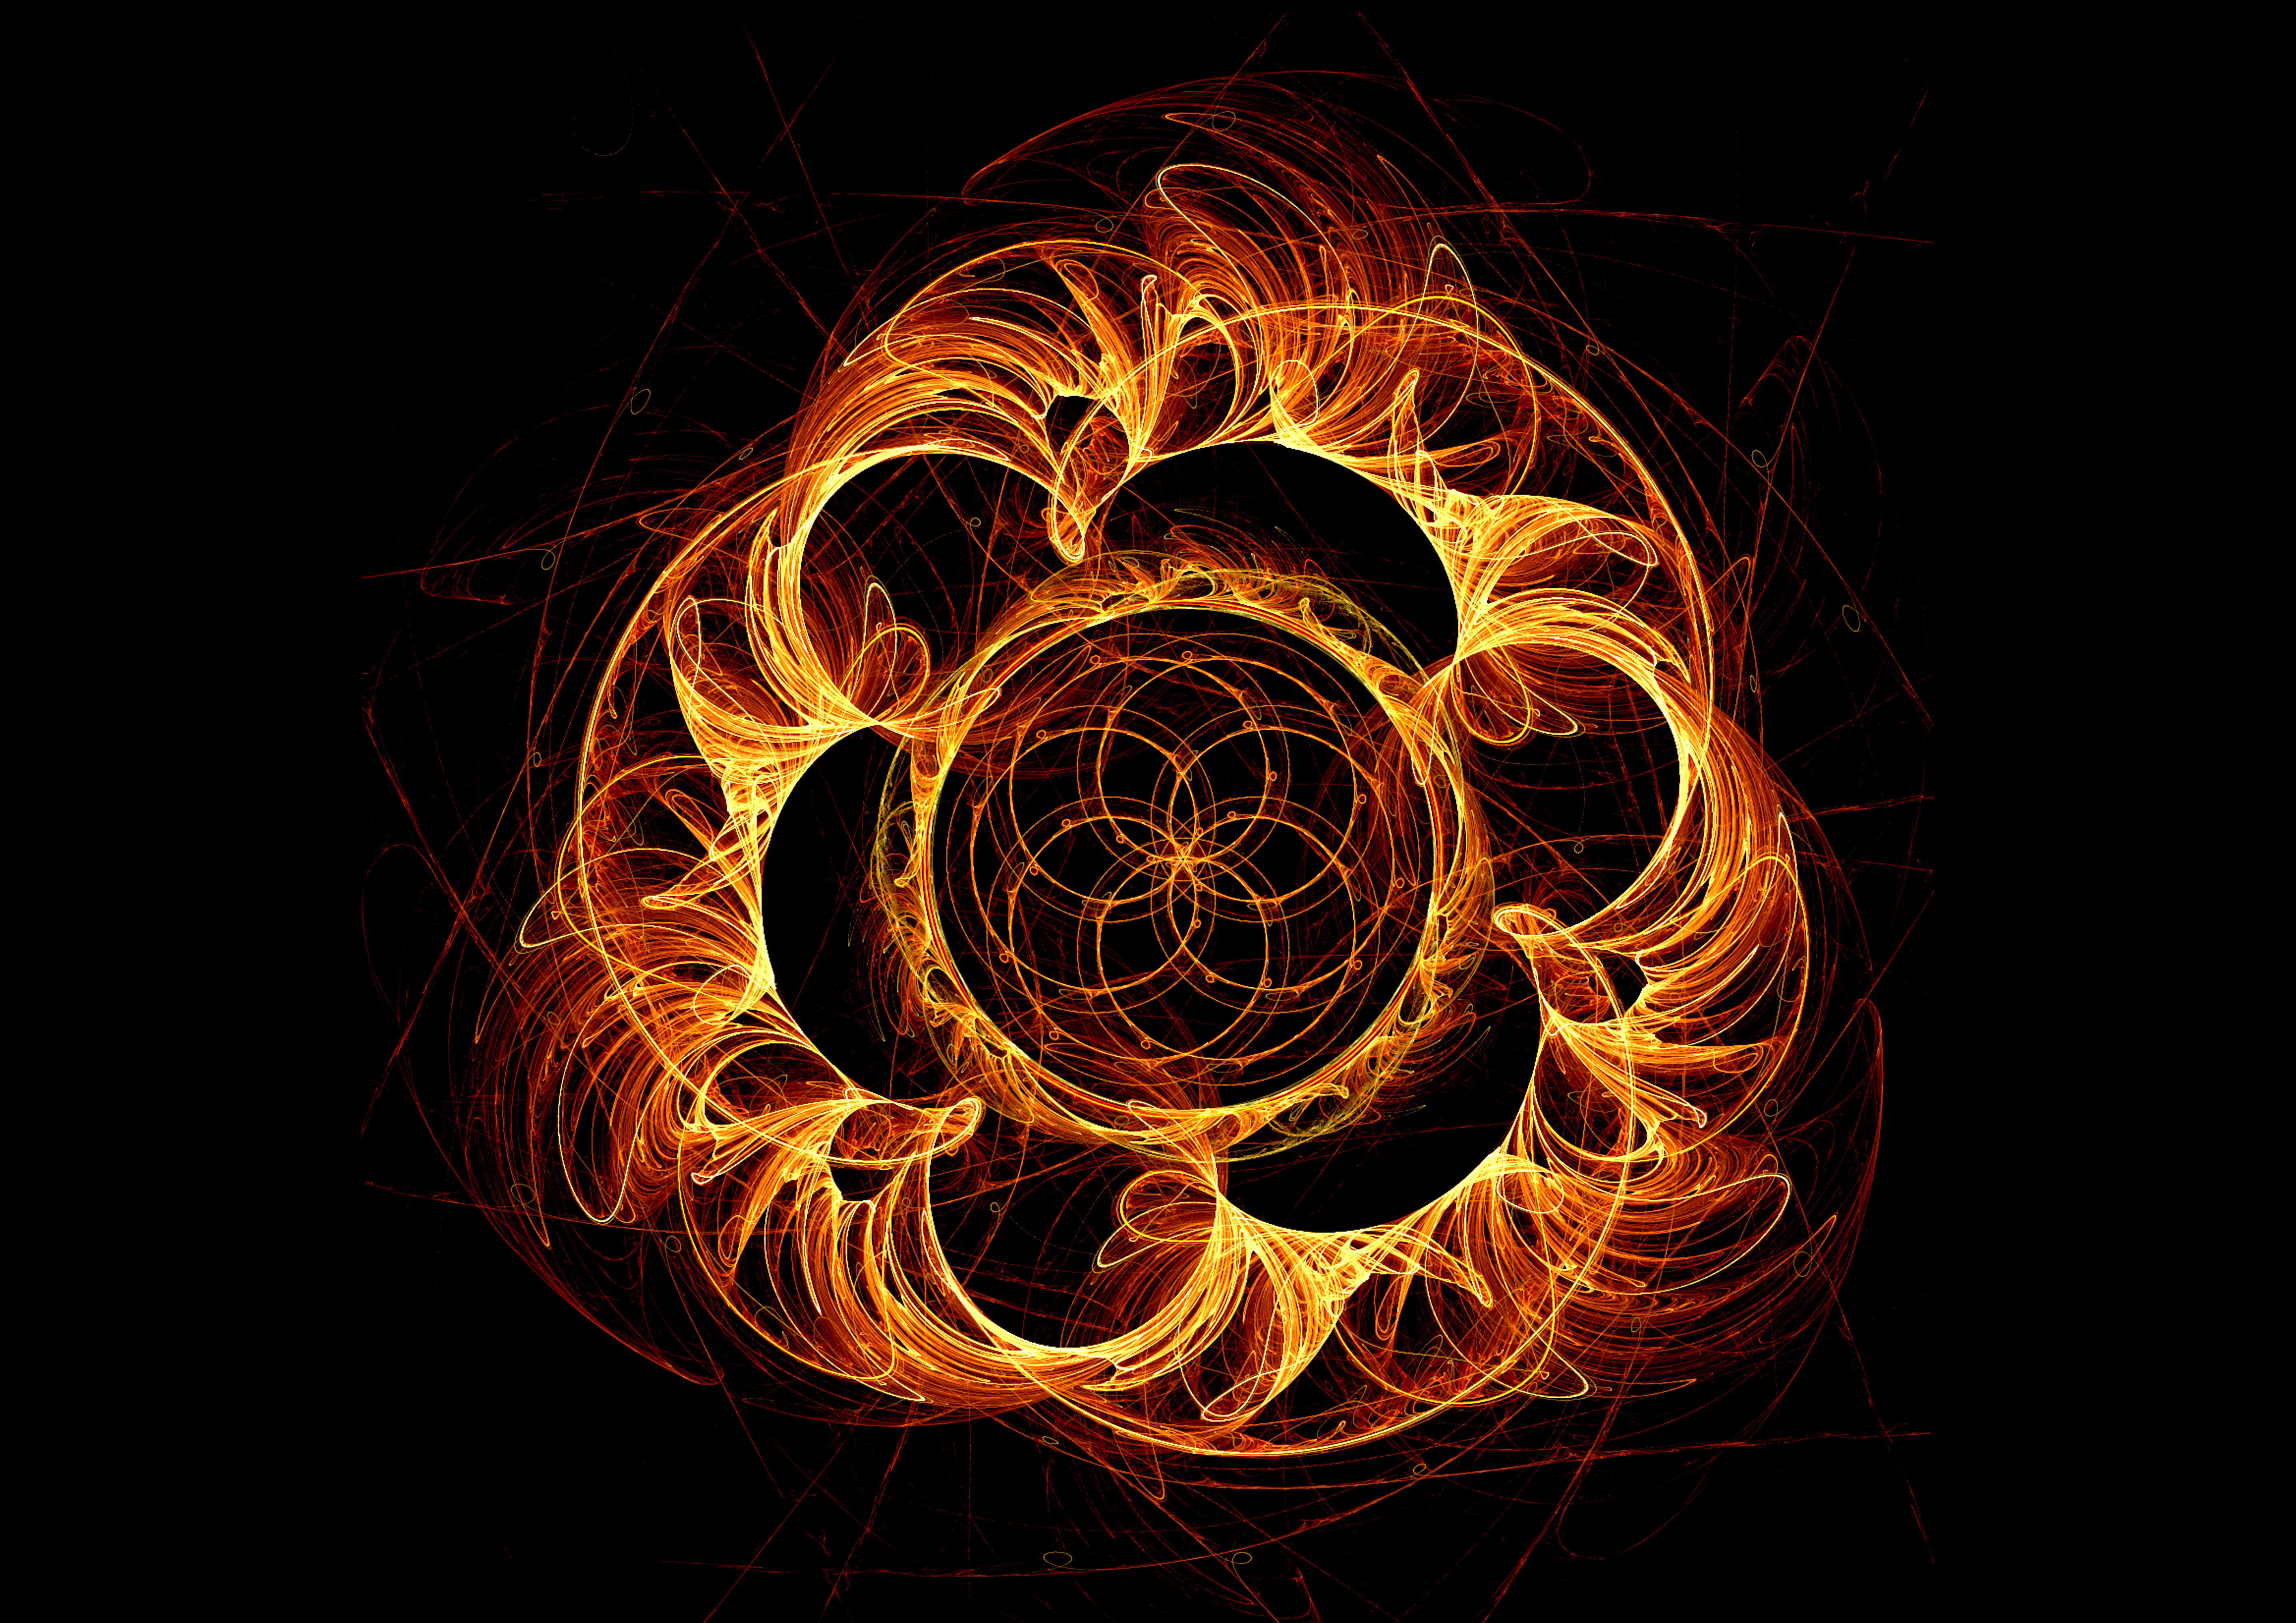 desktop Images abstract, bright, fractal, confused, intricate, flaming, swirling, involute, fiery